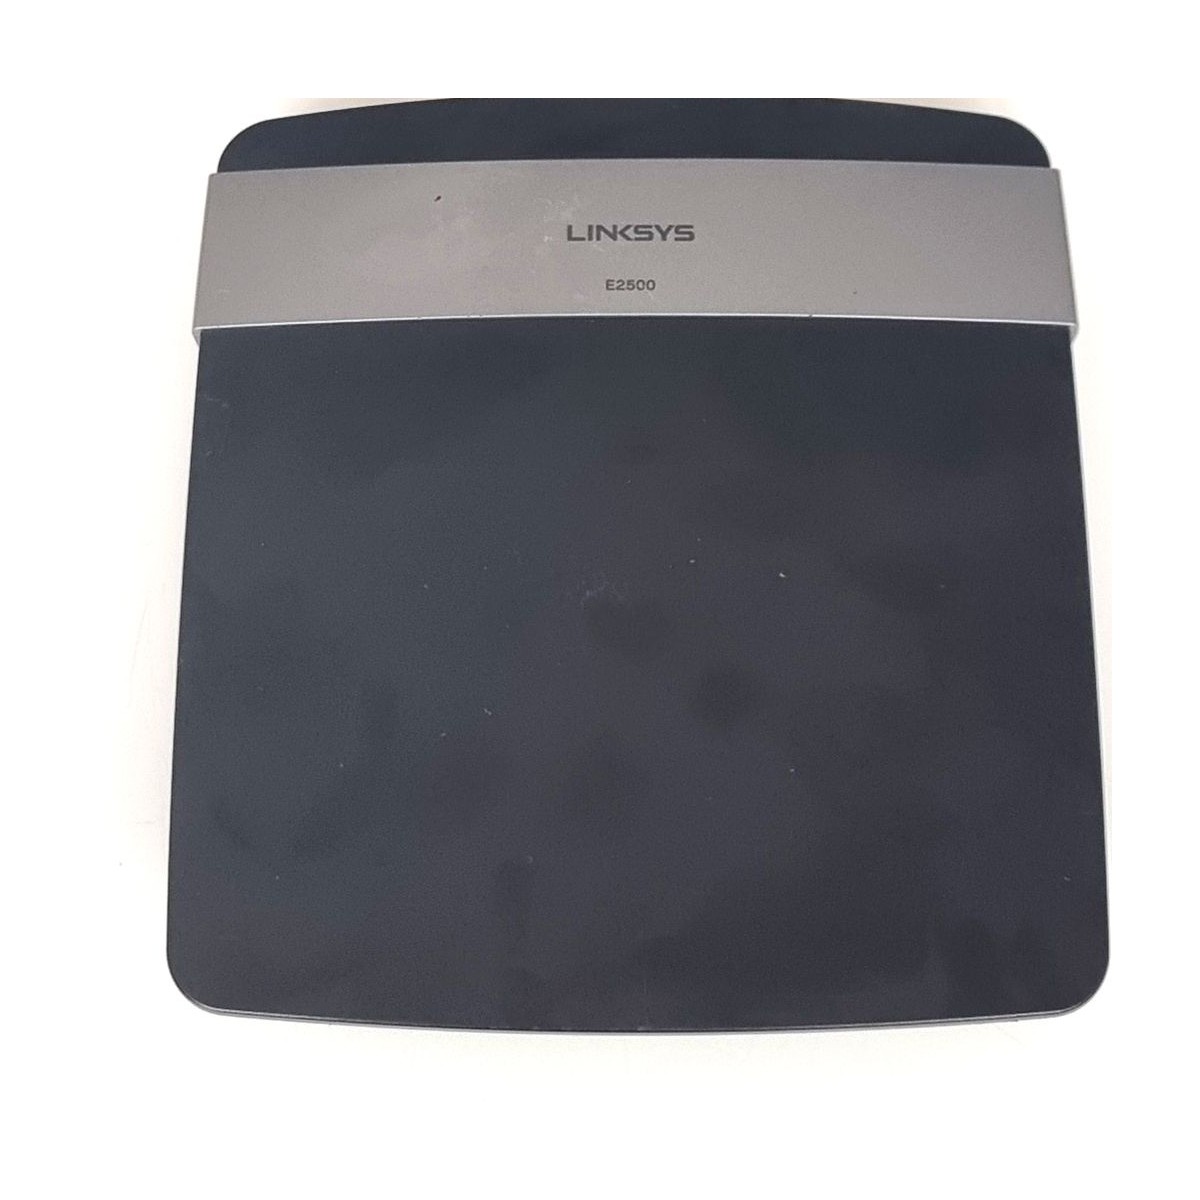 ROUTER LINKSYS E2500 WiFi 2.4/5GHZ 600MB/s